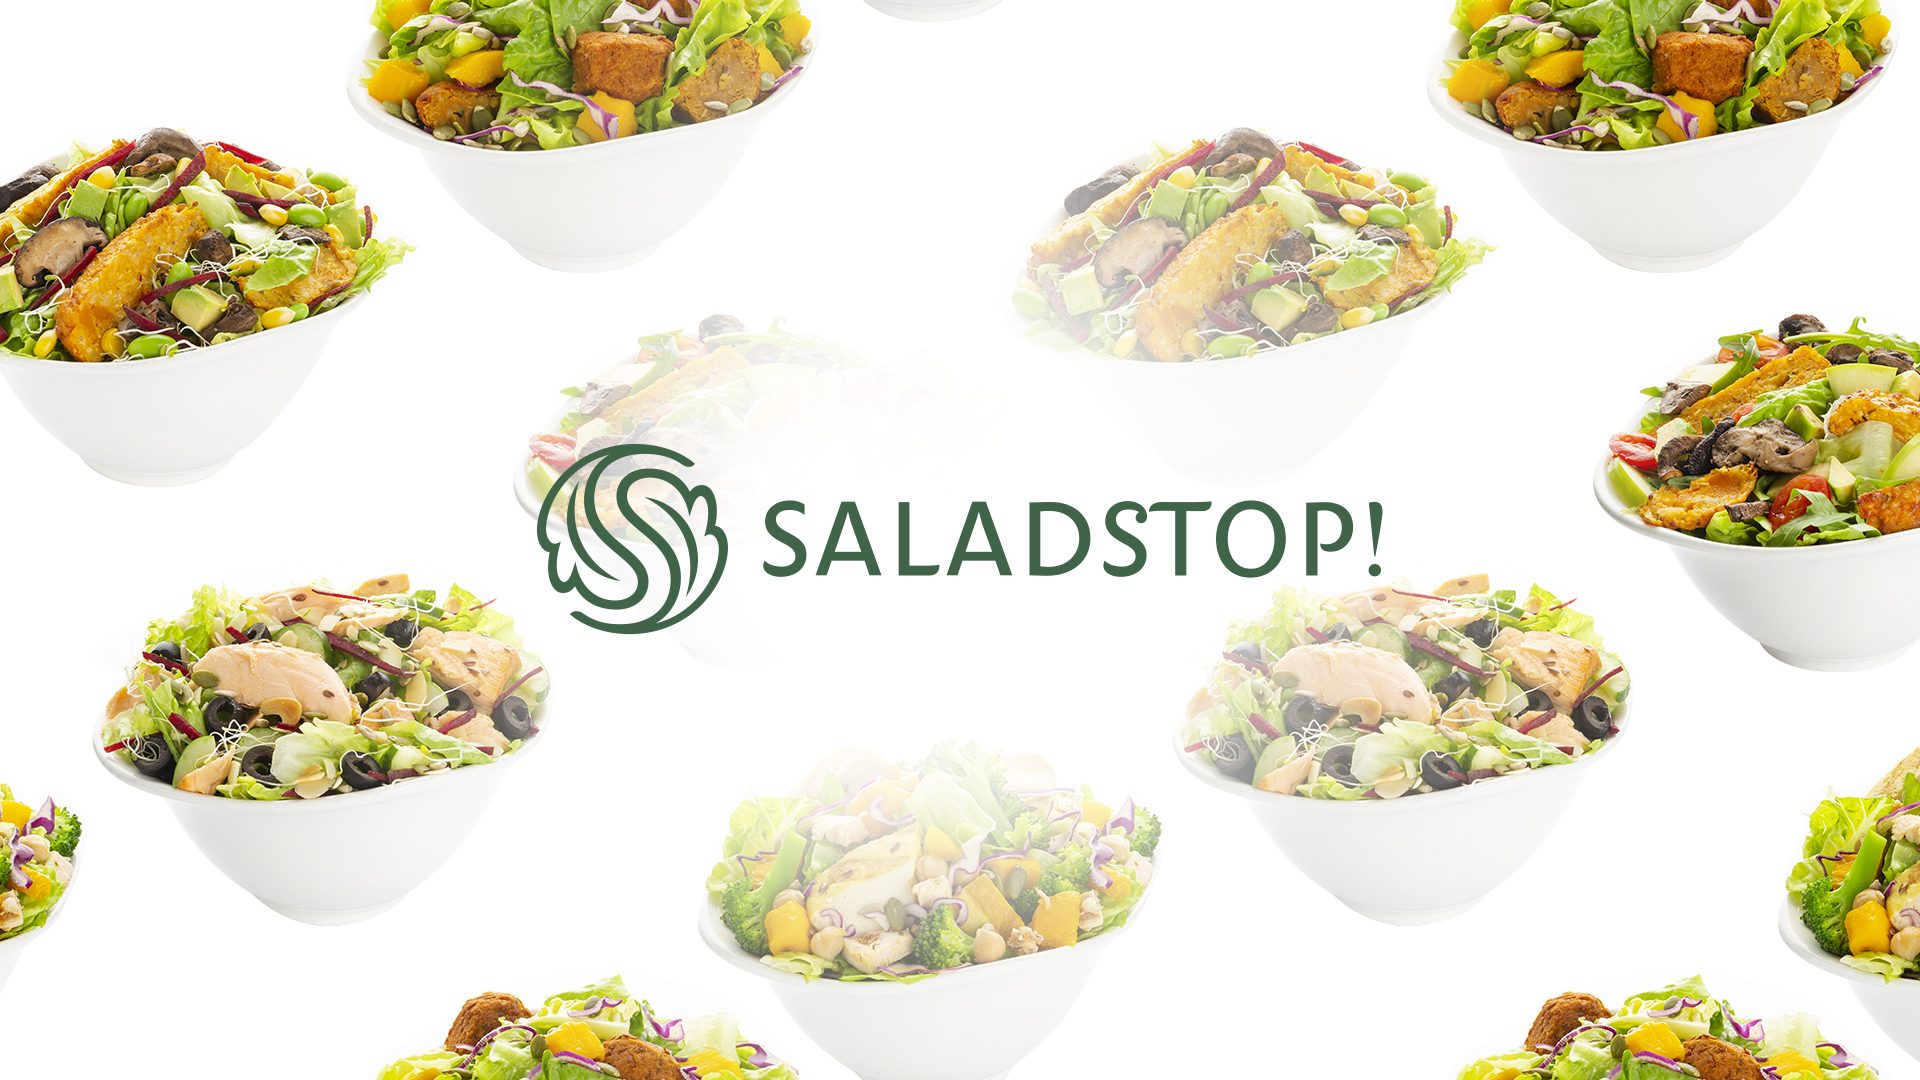 SaladStop! now offers weekly meal subscriptions